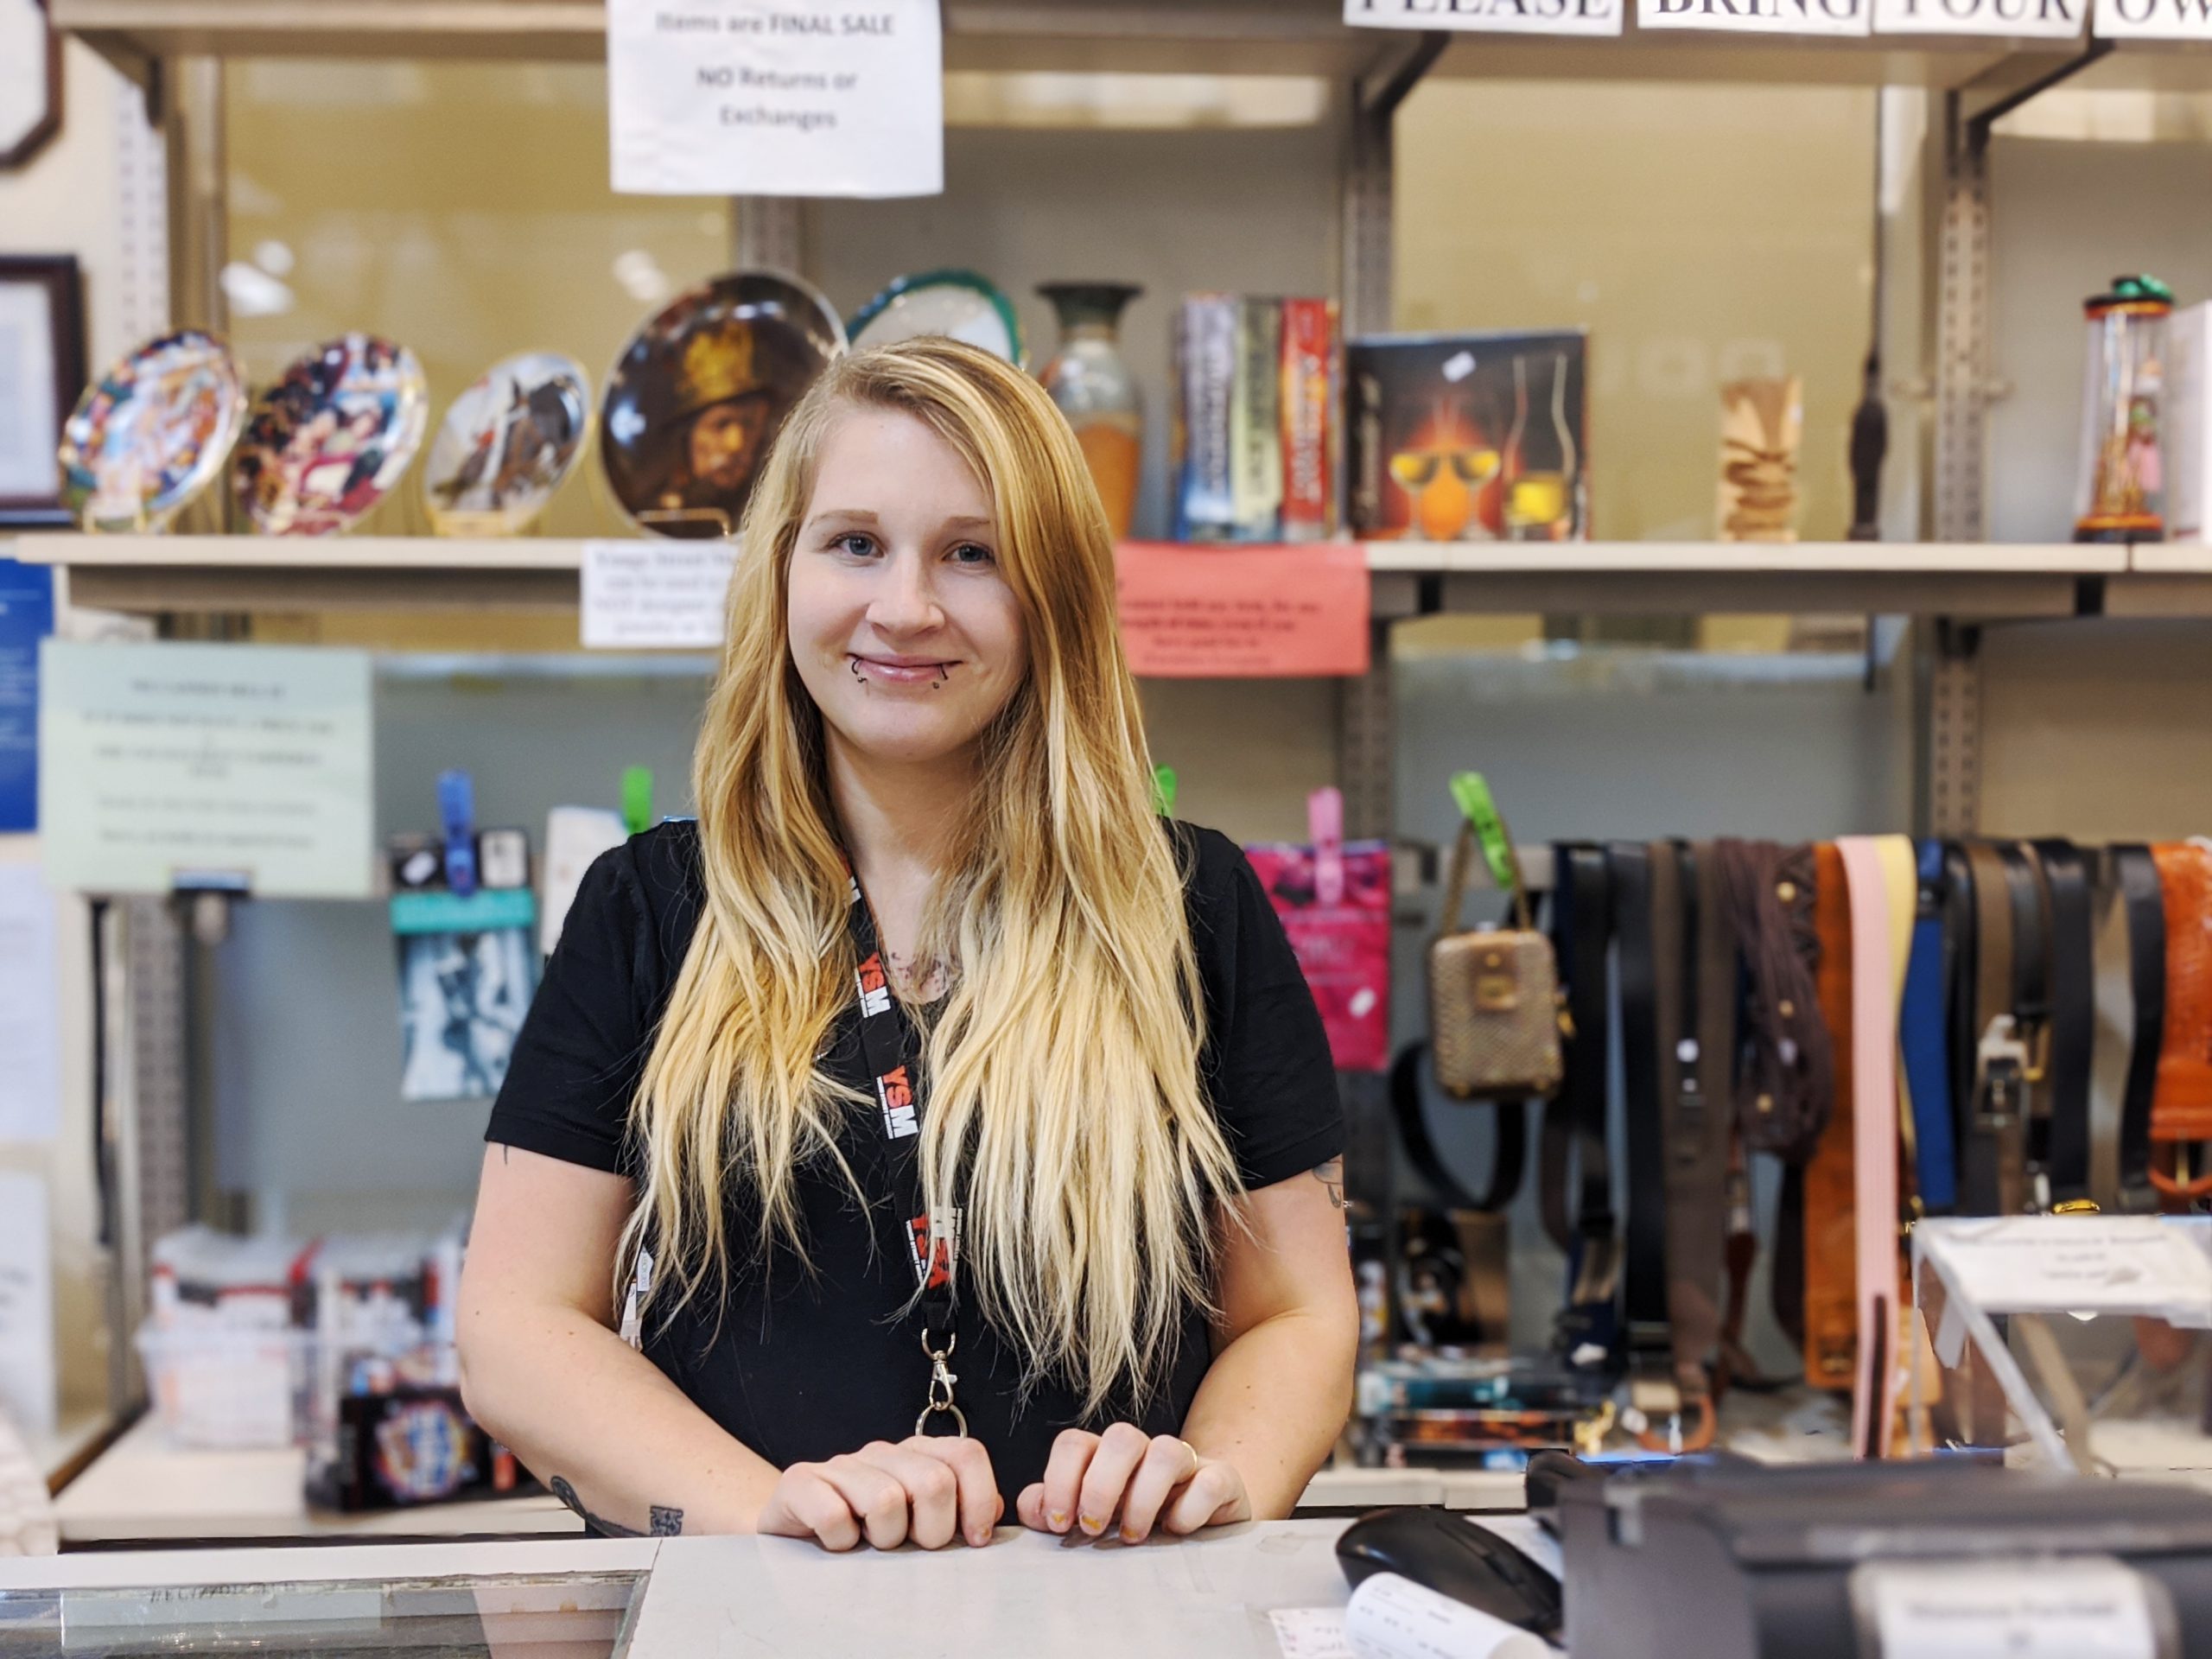 YSM's Double Take provides youth and young women employment experience through the thrift shop